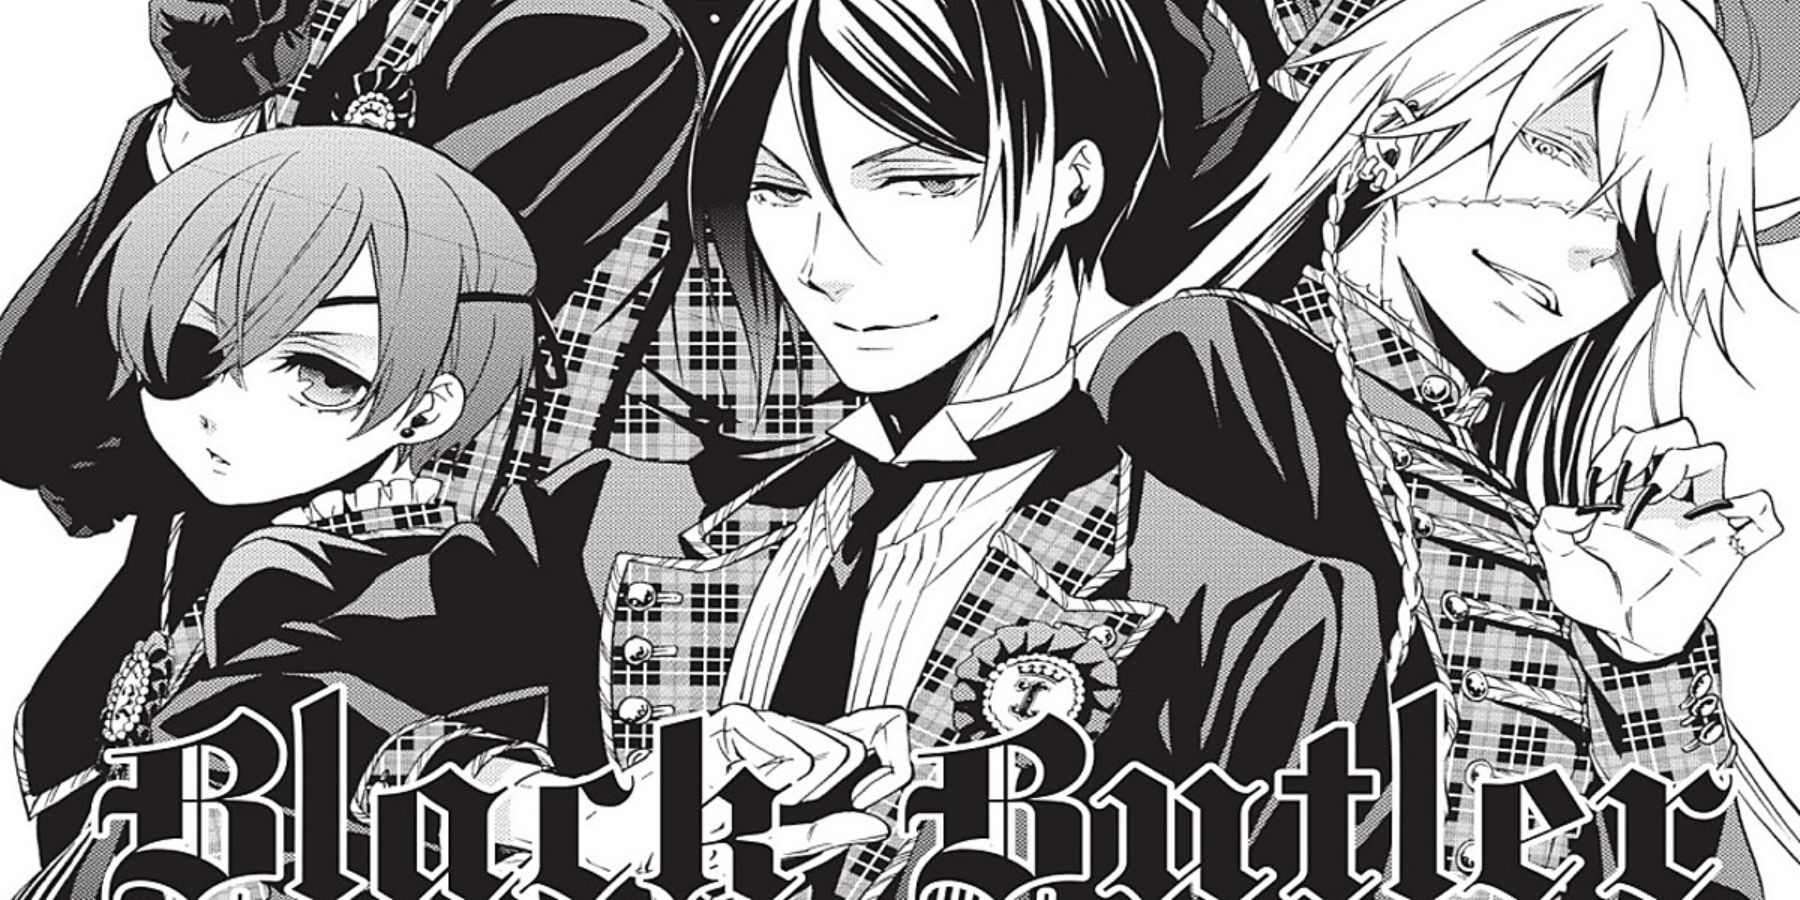 Black Butler manga cover with Ceil